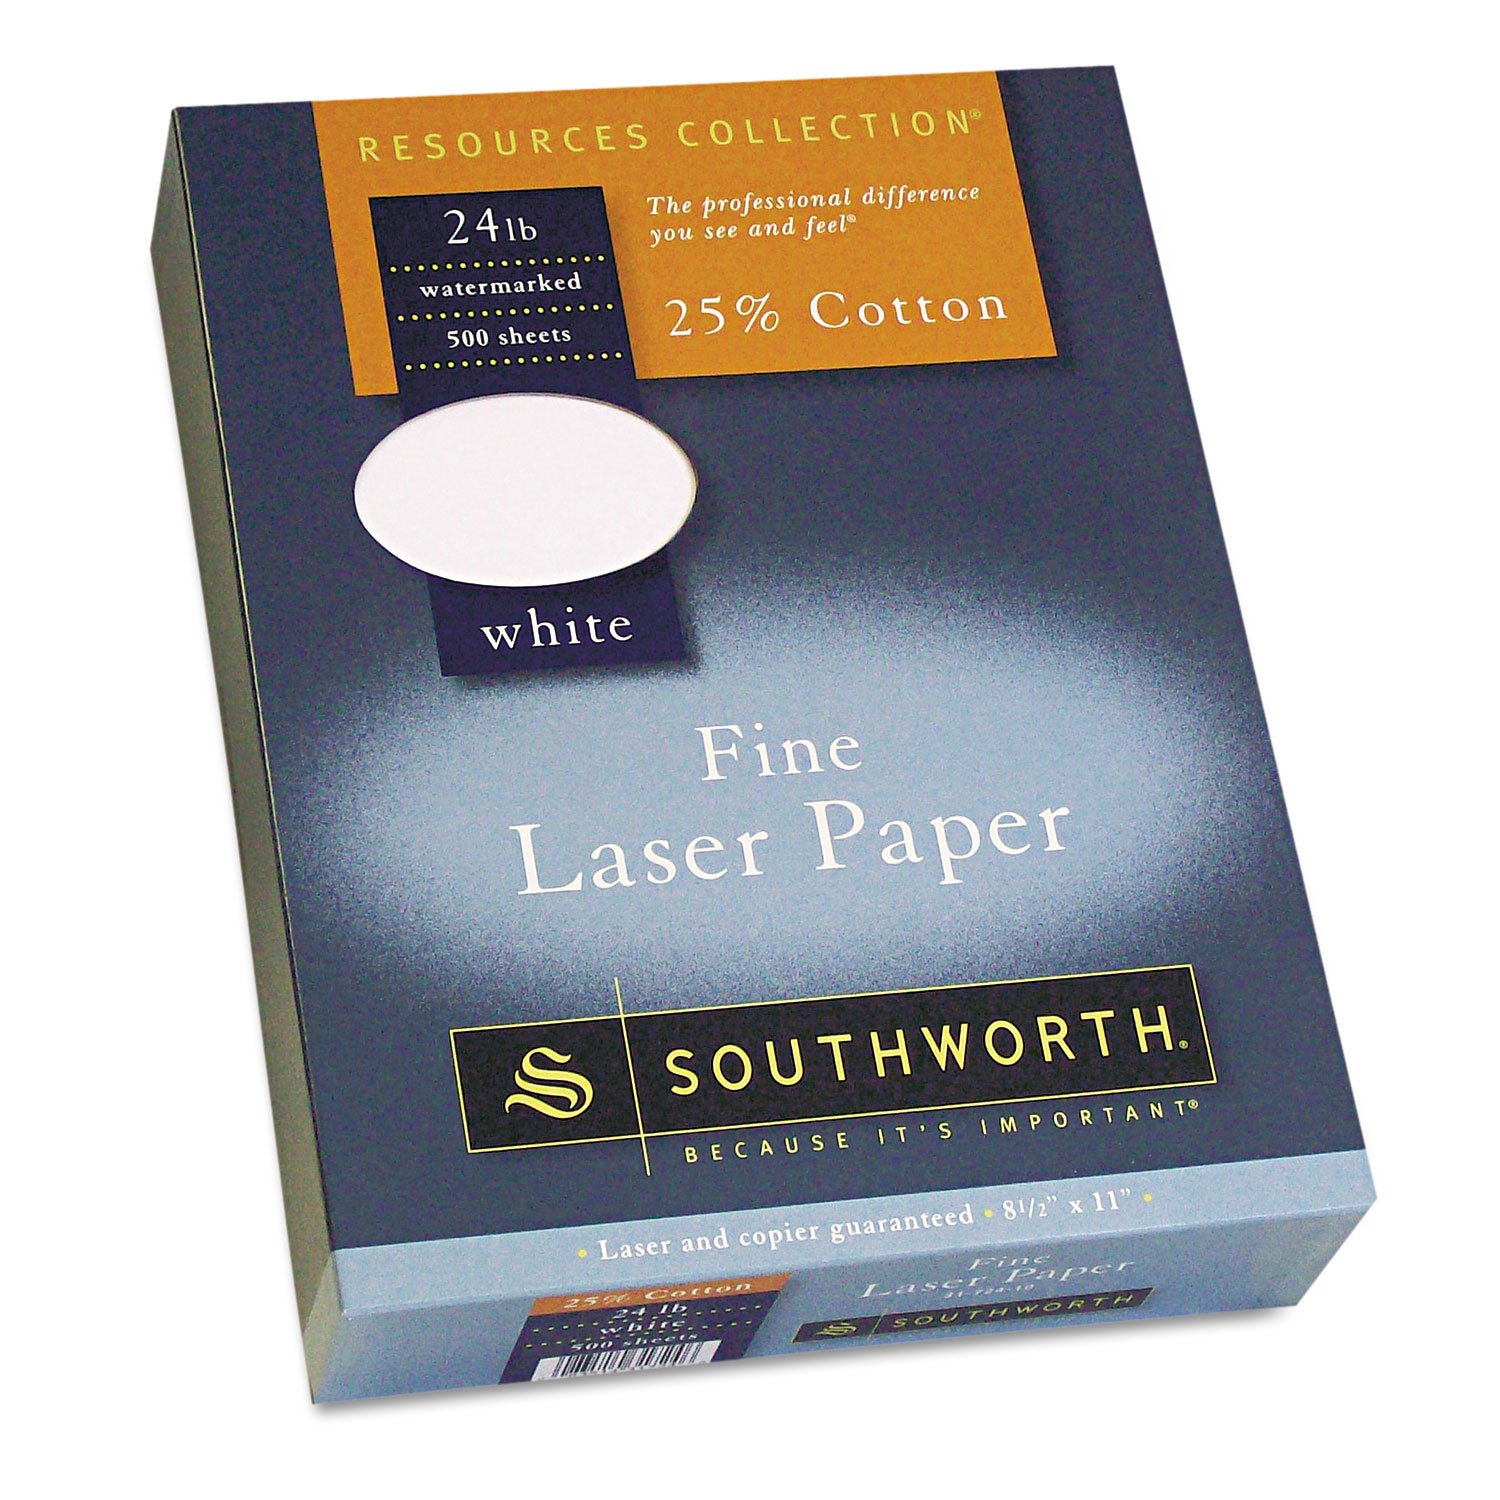 Southworth 3172410 25% Cotton Laser Paper White 24 lbs. Smooth Finish 8-1/2 x 11 500/Box